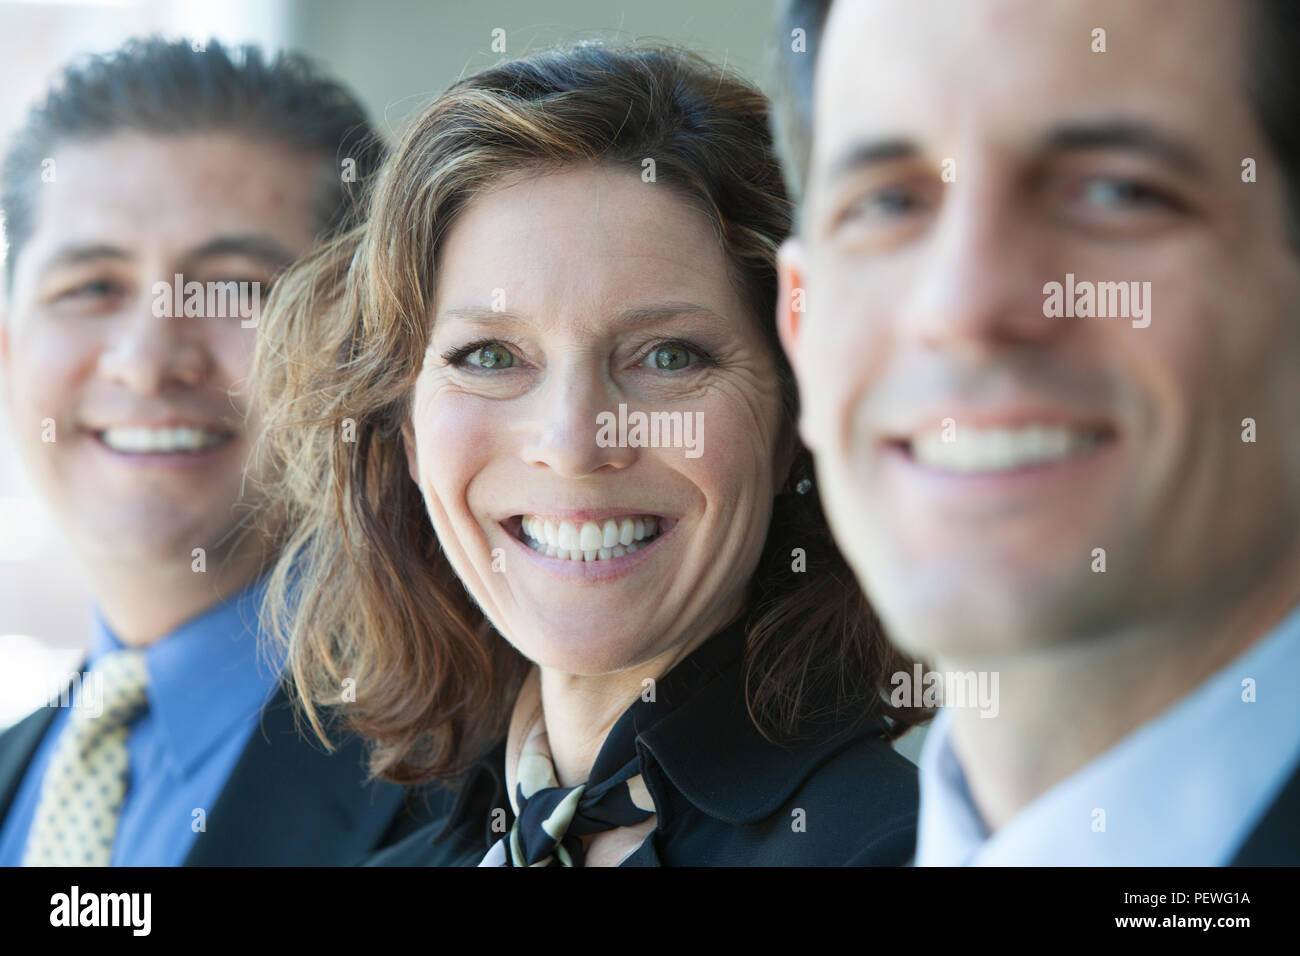 A closeup portrait of a row of multi ethnic business people, with focus on the Caucasian businesswoman. Stock Photo